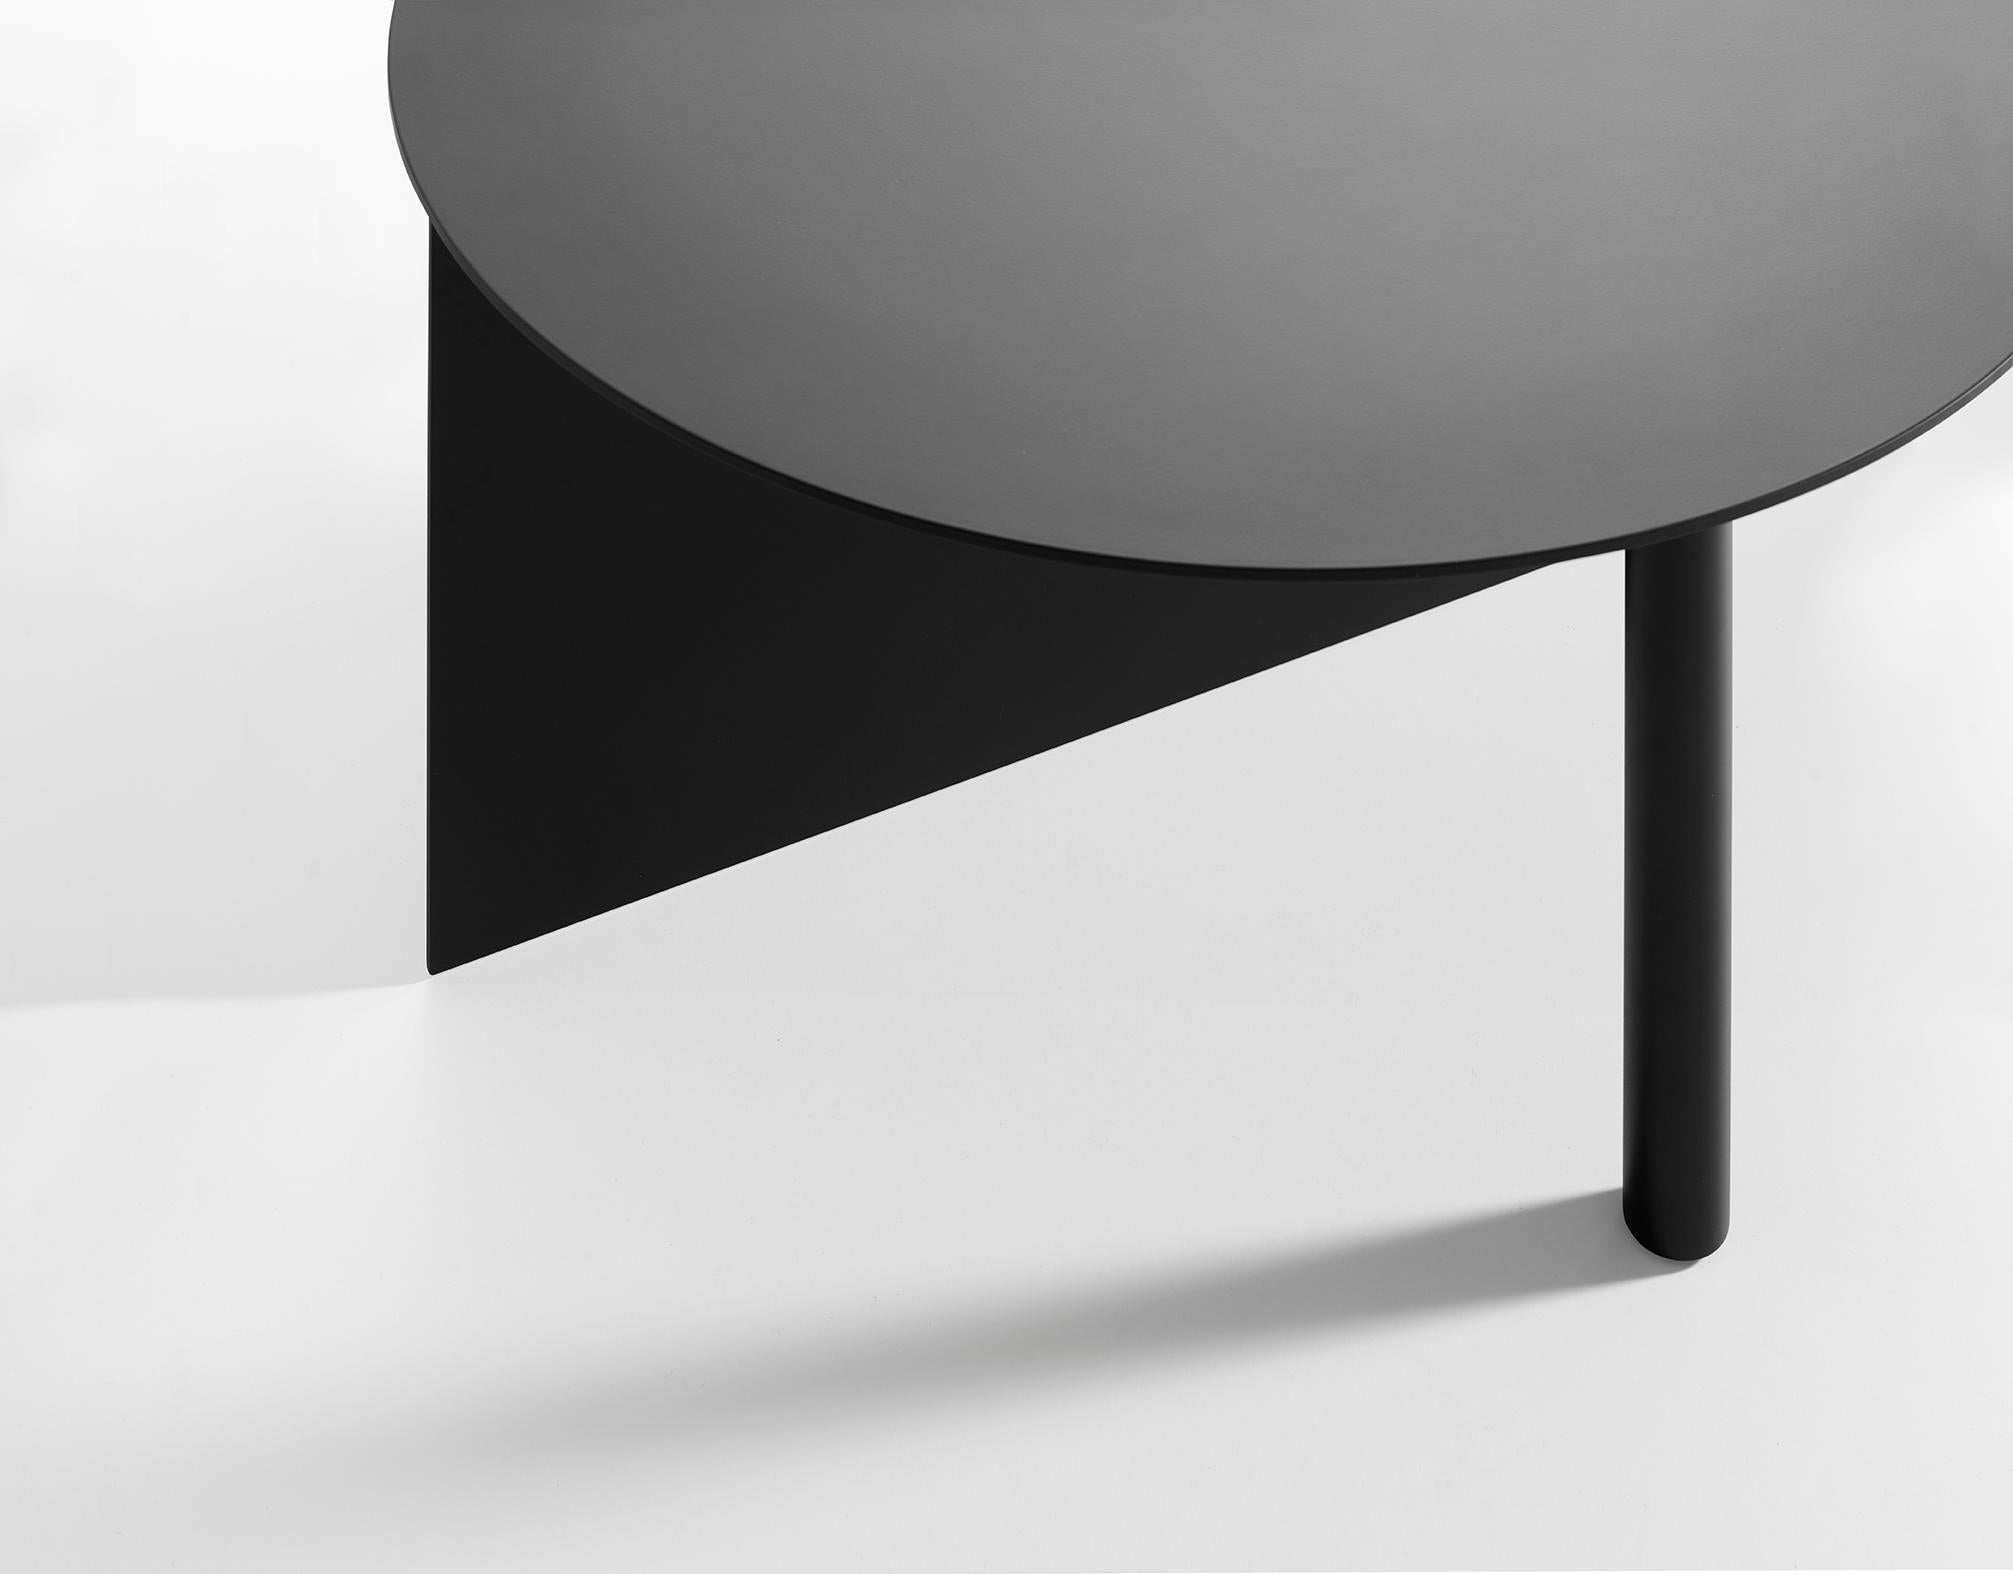 Piatto is a family of tables made from solid steel plate, despite the material, however, the objects look light. The range includes small side tables, large coffee tables, and tall display tables. Piatto tables are perhaps familiar, the angles,